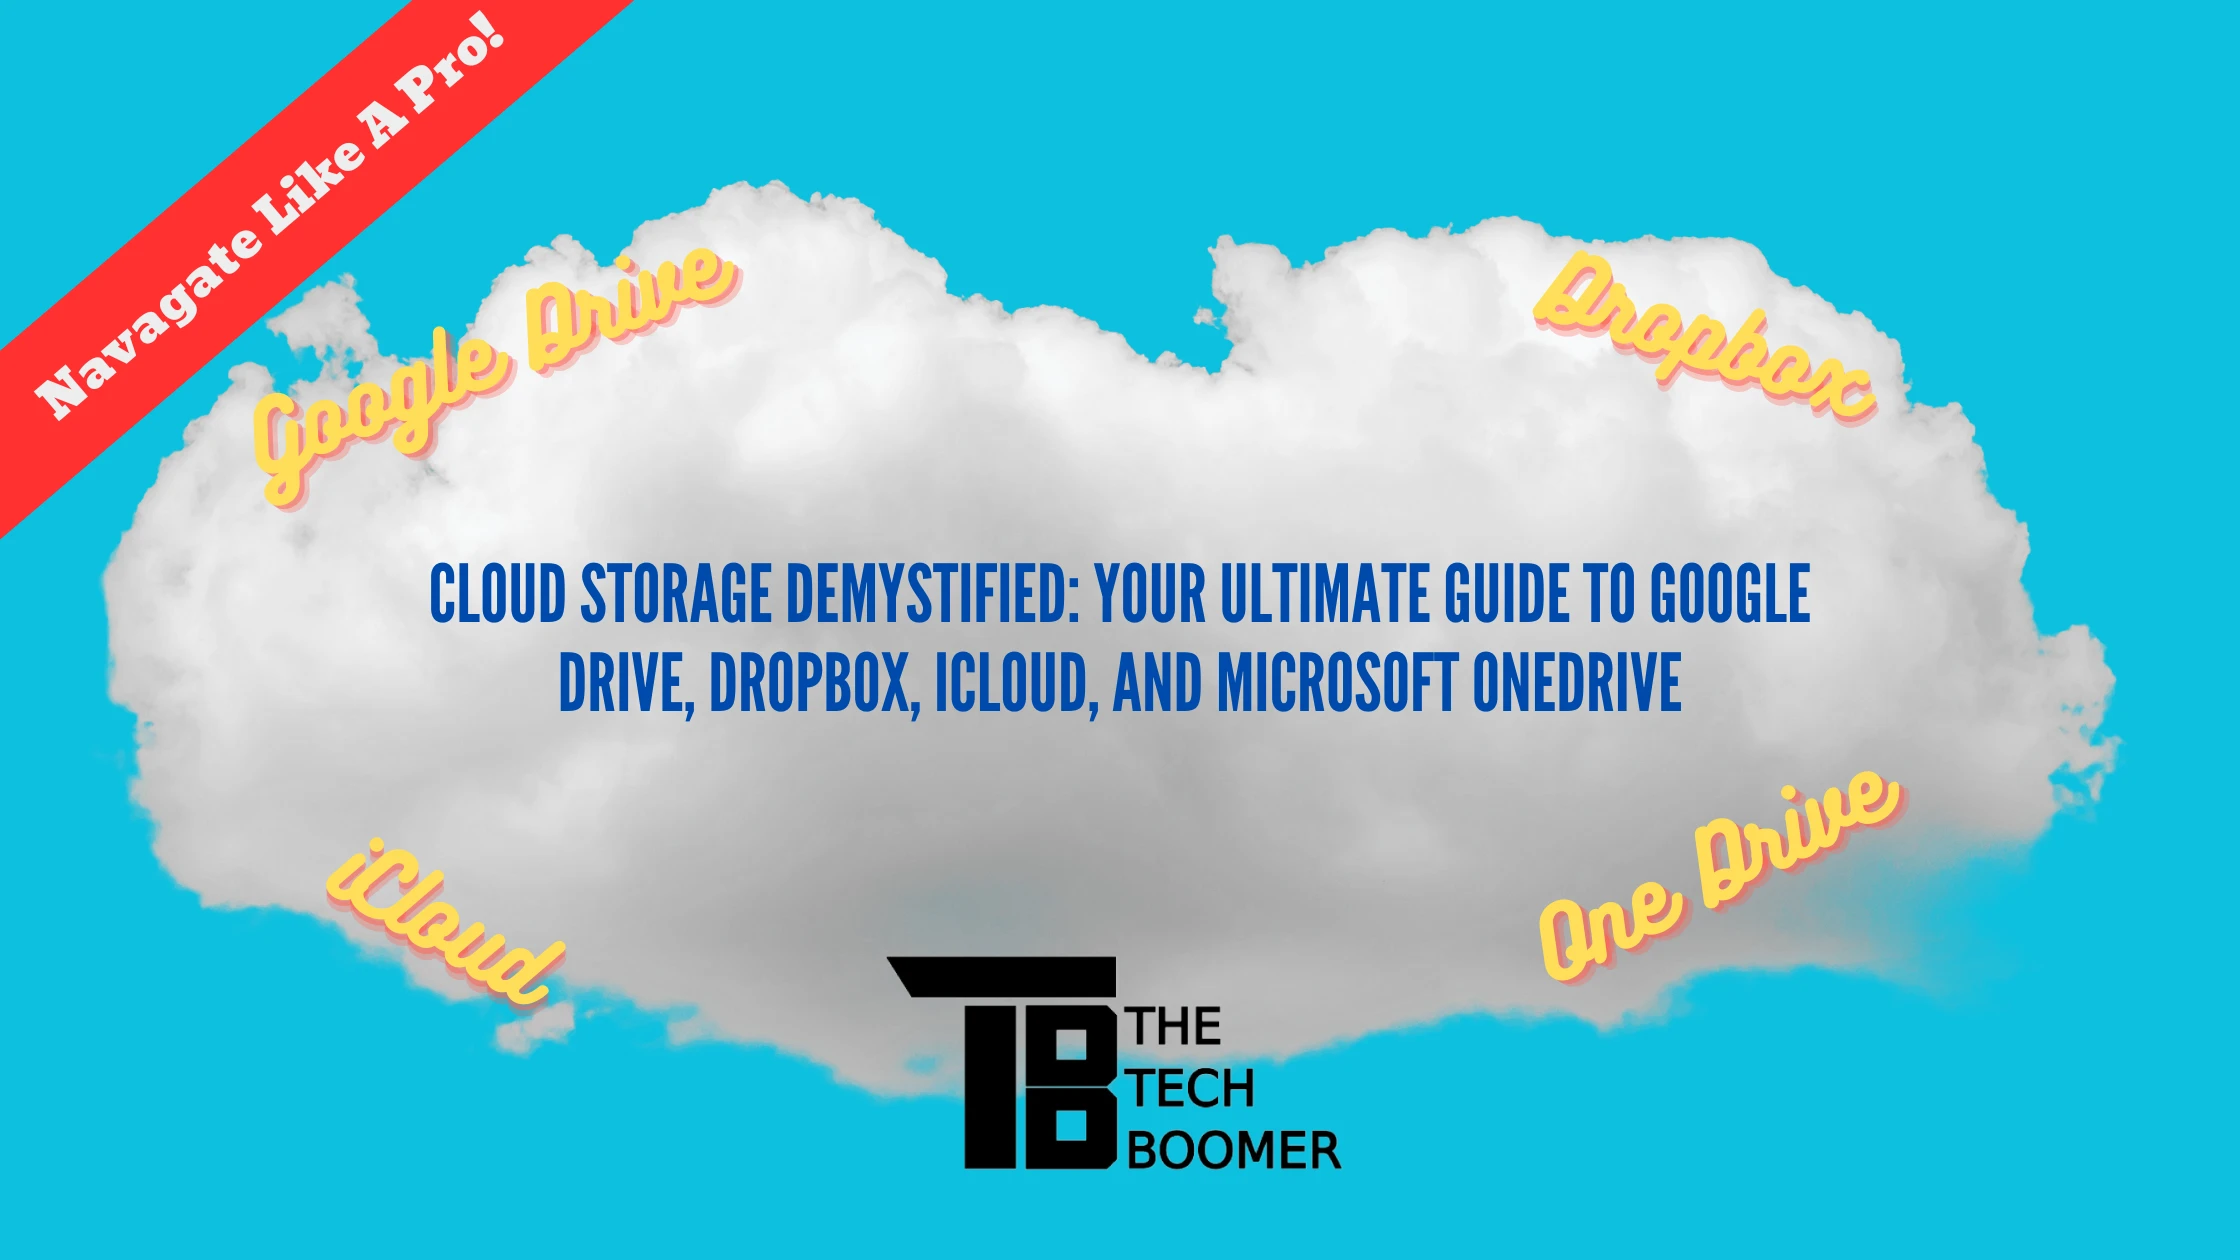 How To Use OneDrive: A Guide To Microsoft's Cloud Storage Service